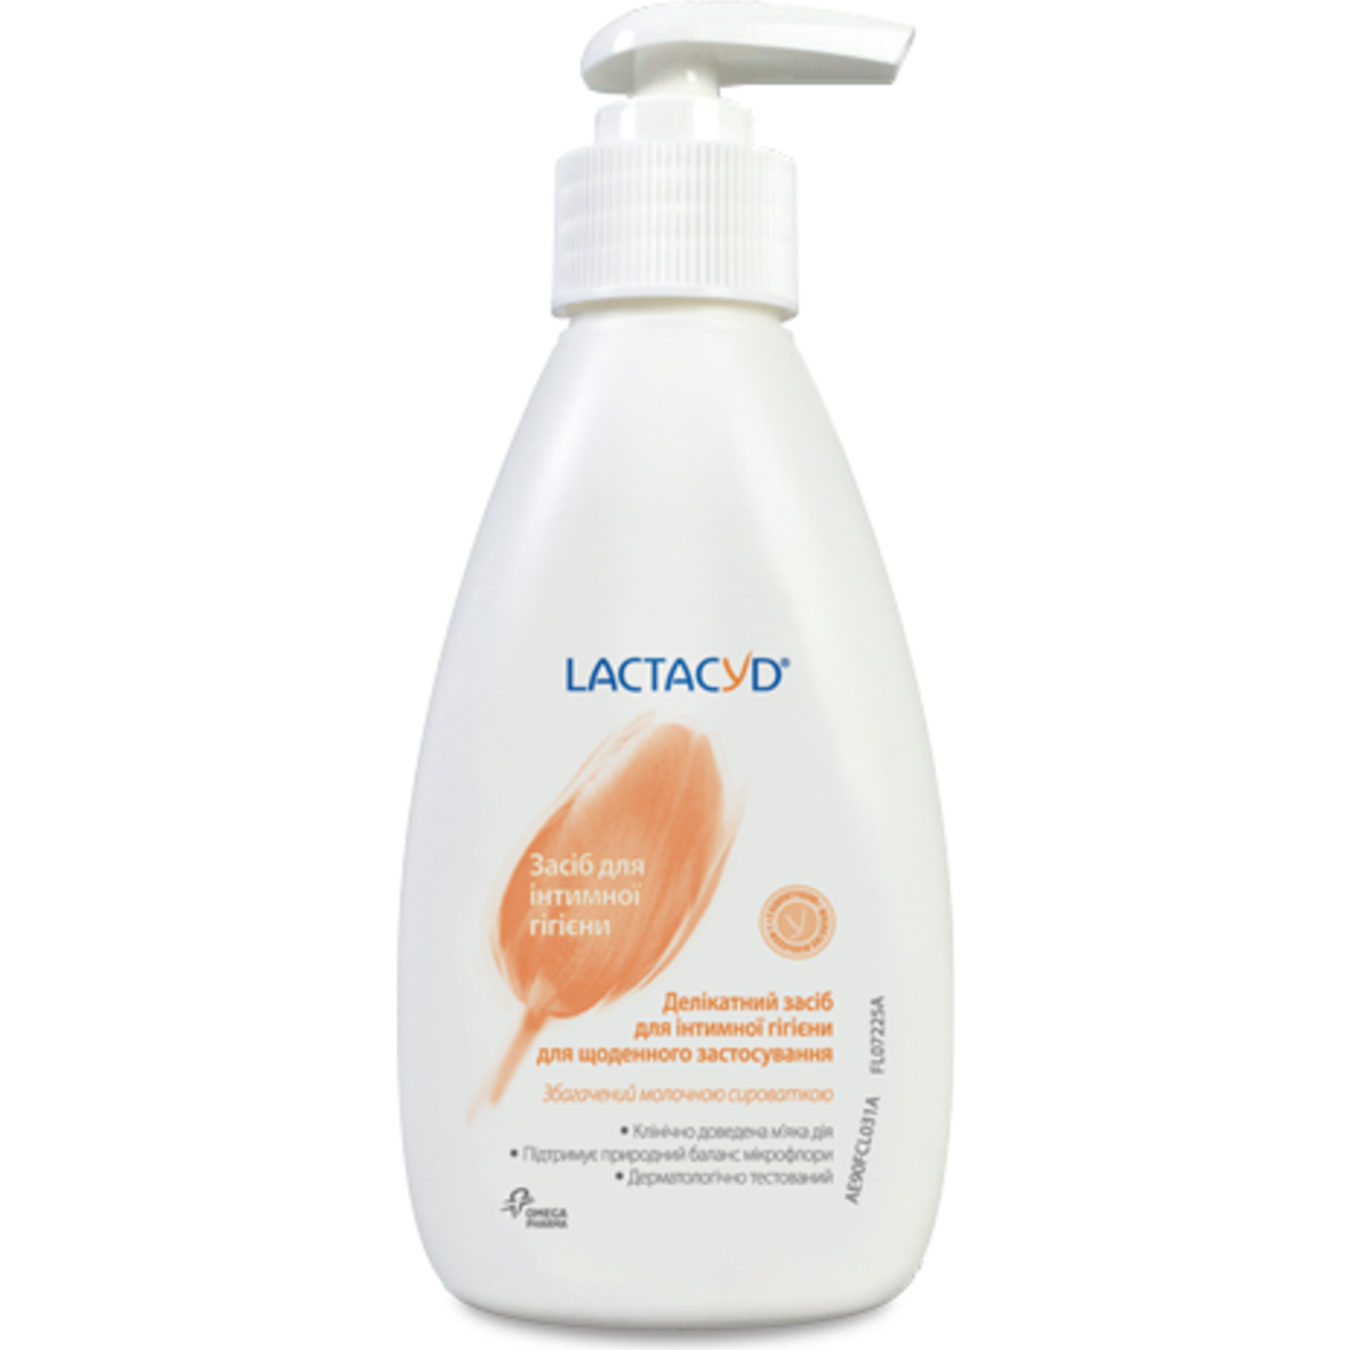 Lactacyd With Dispencer For Intimate Hygiene Gel 200ml